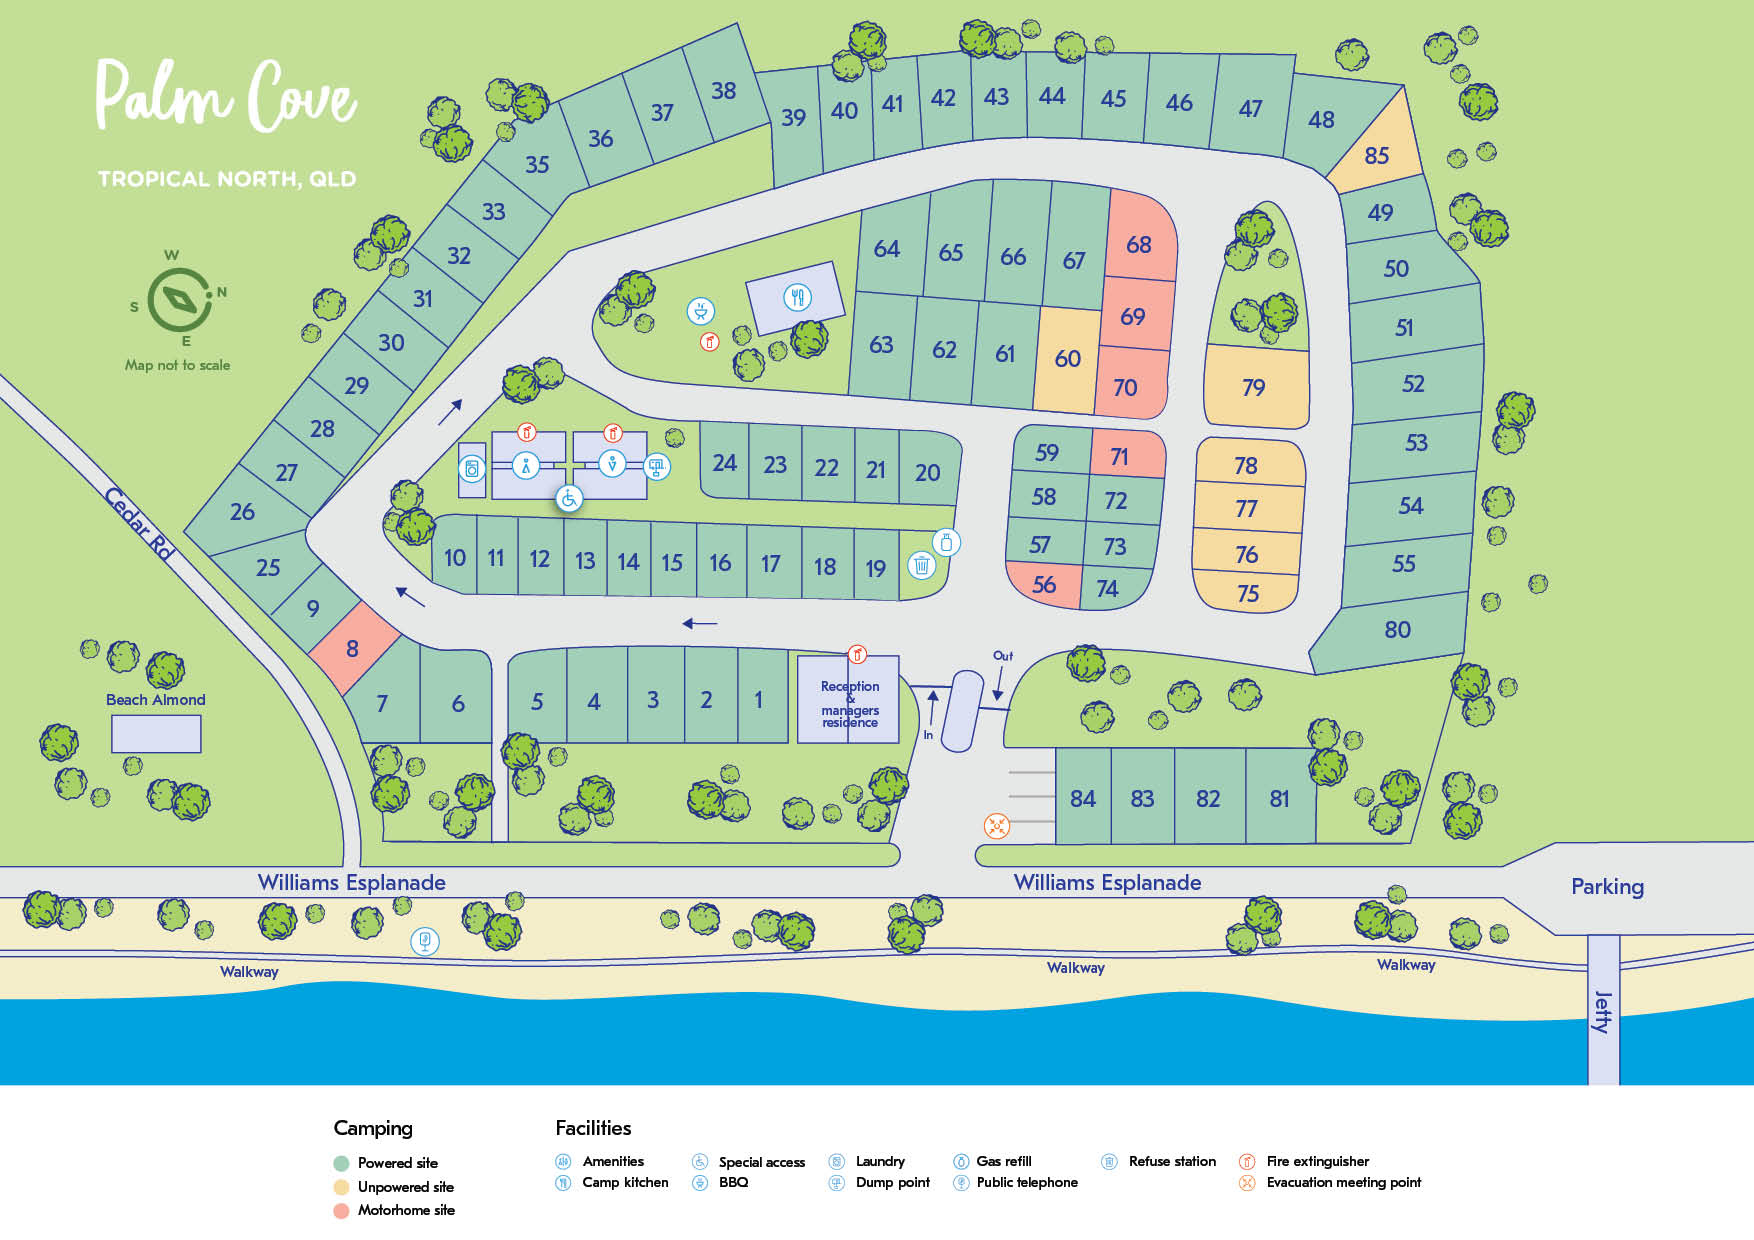 Palm Cove park map and rules